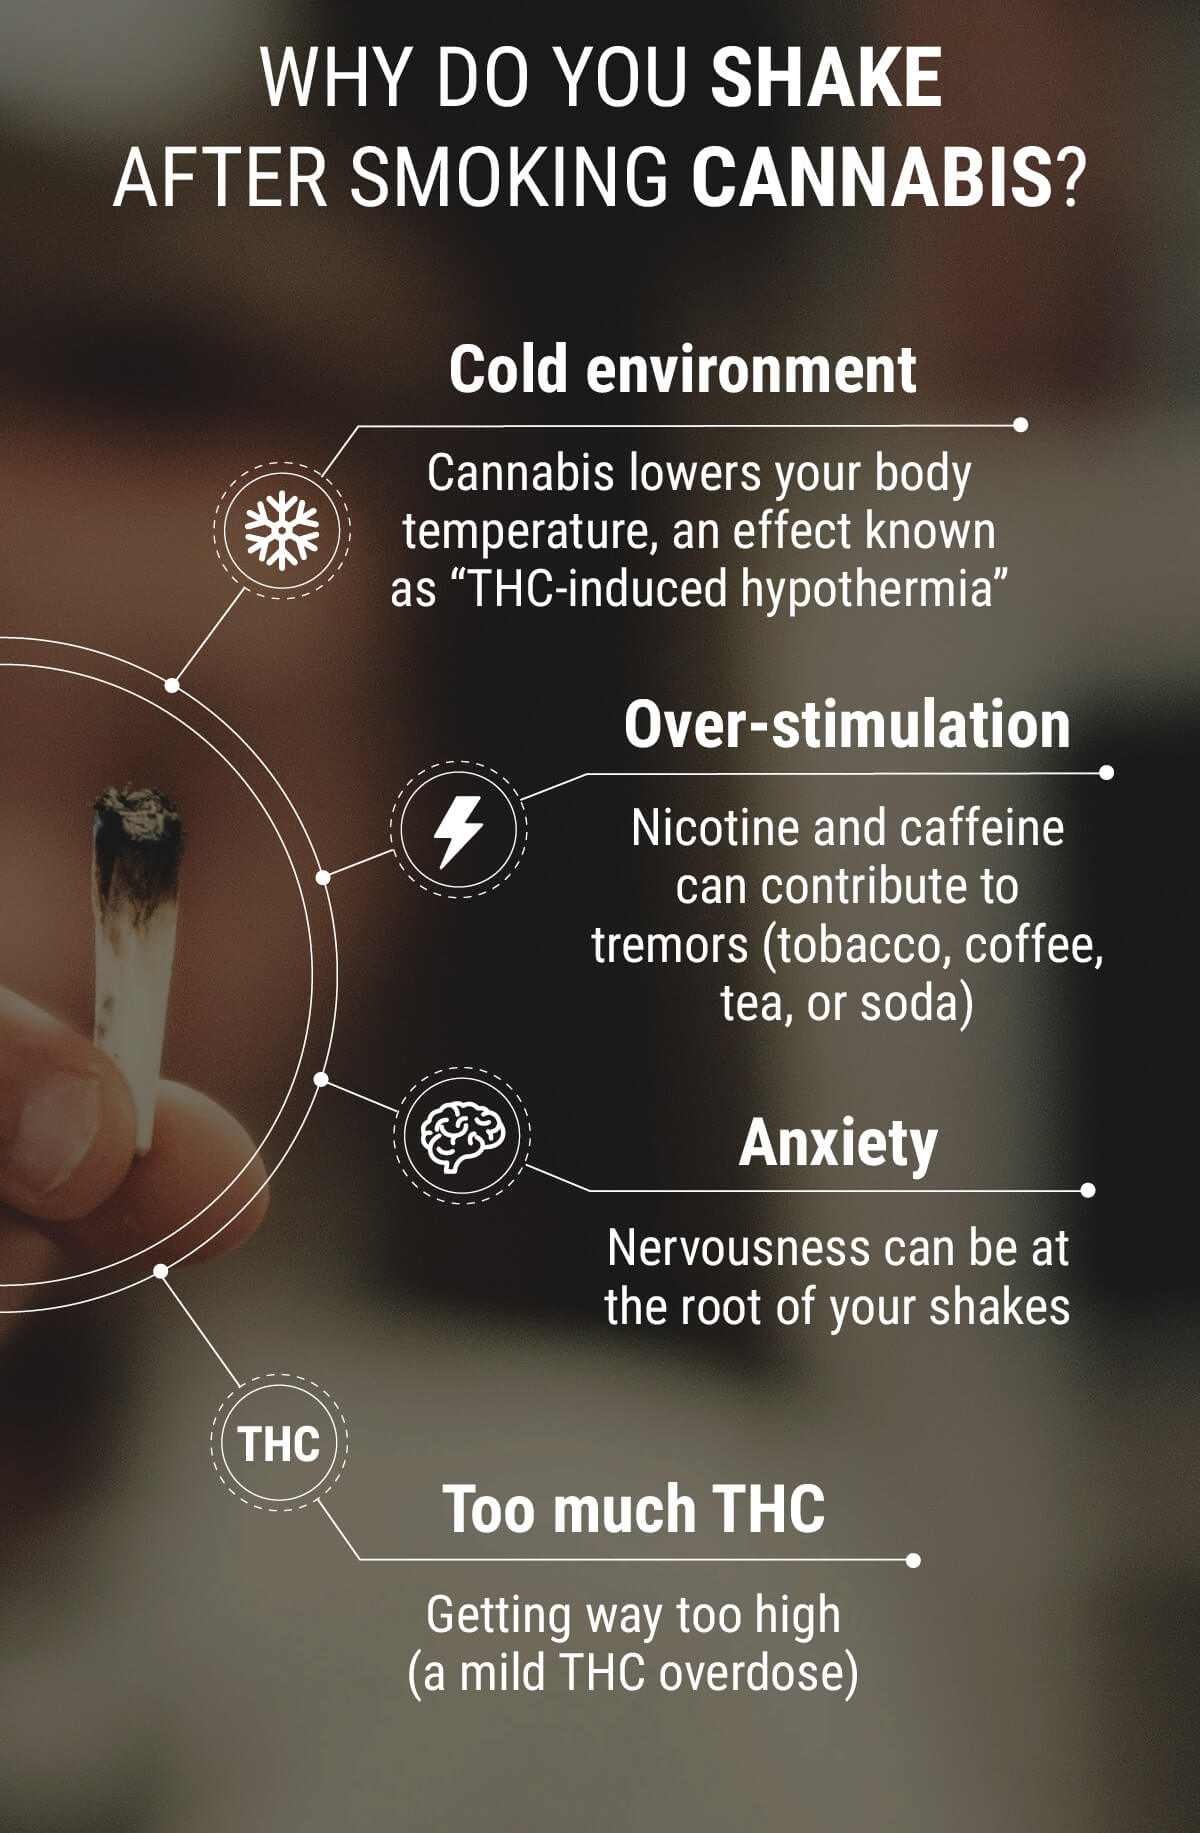 Why do you shake after smoking cannabis?